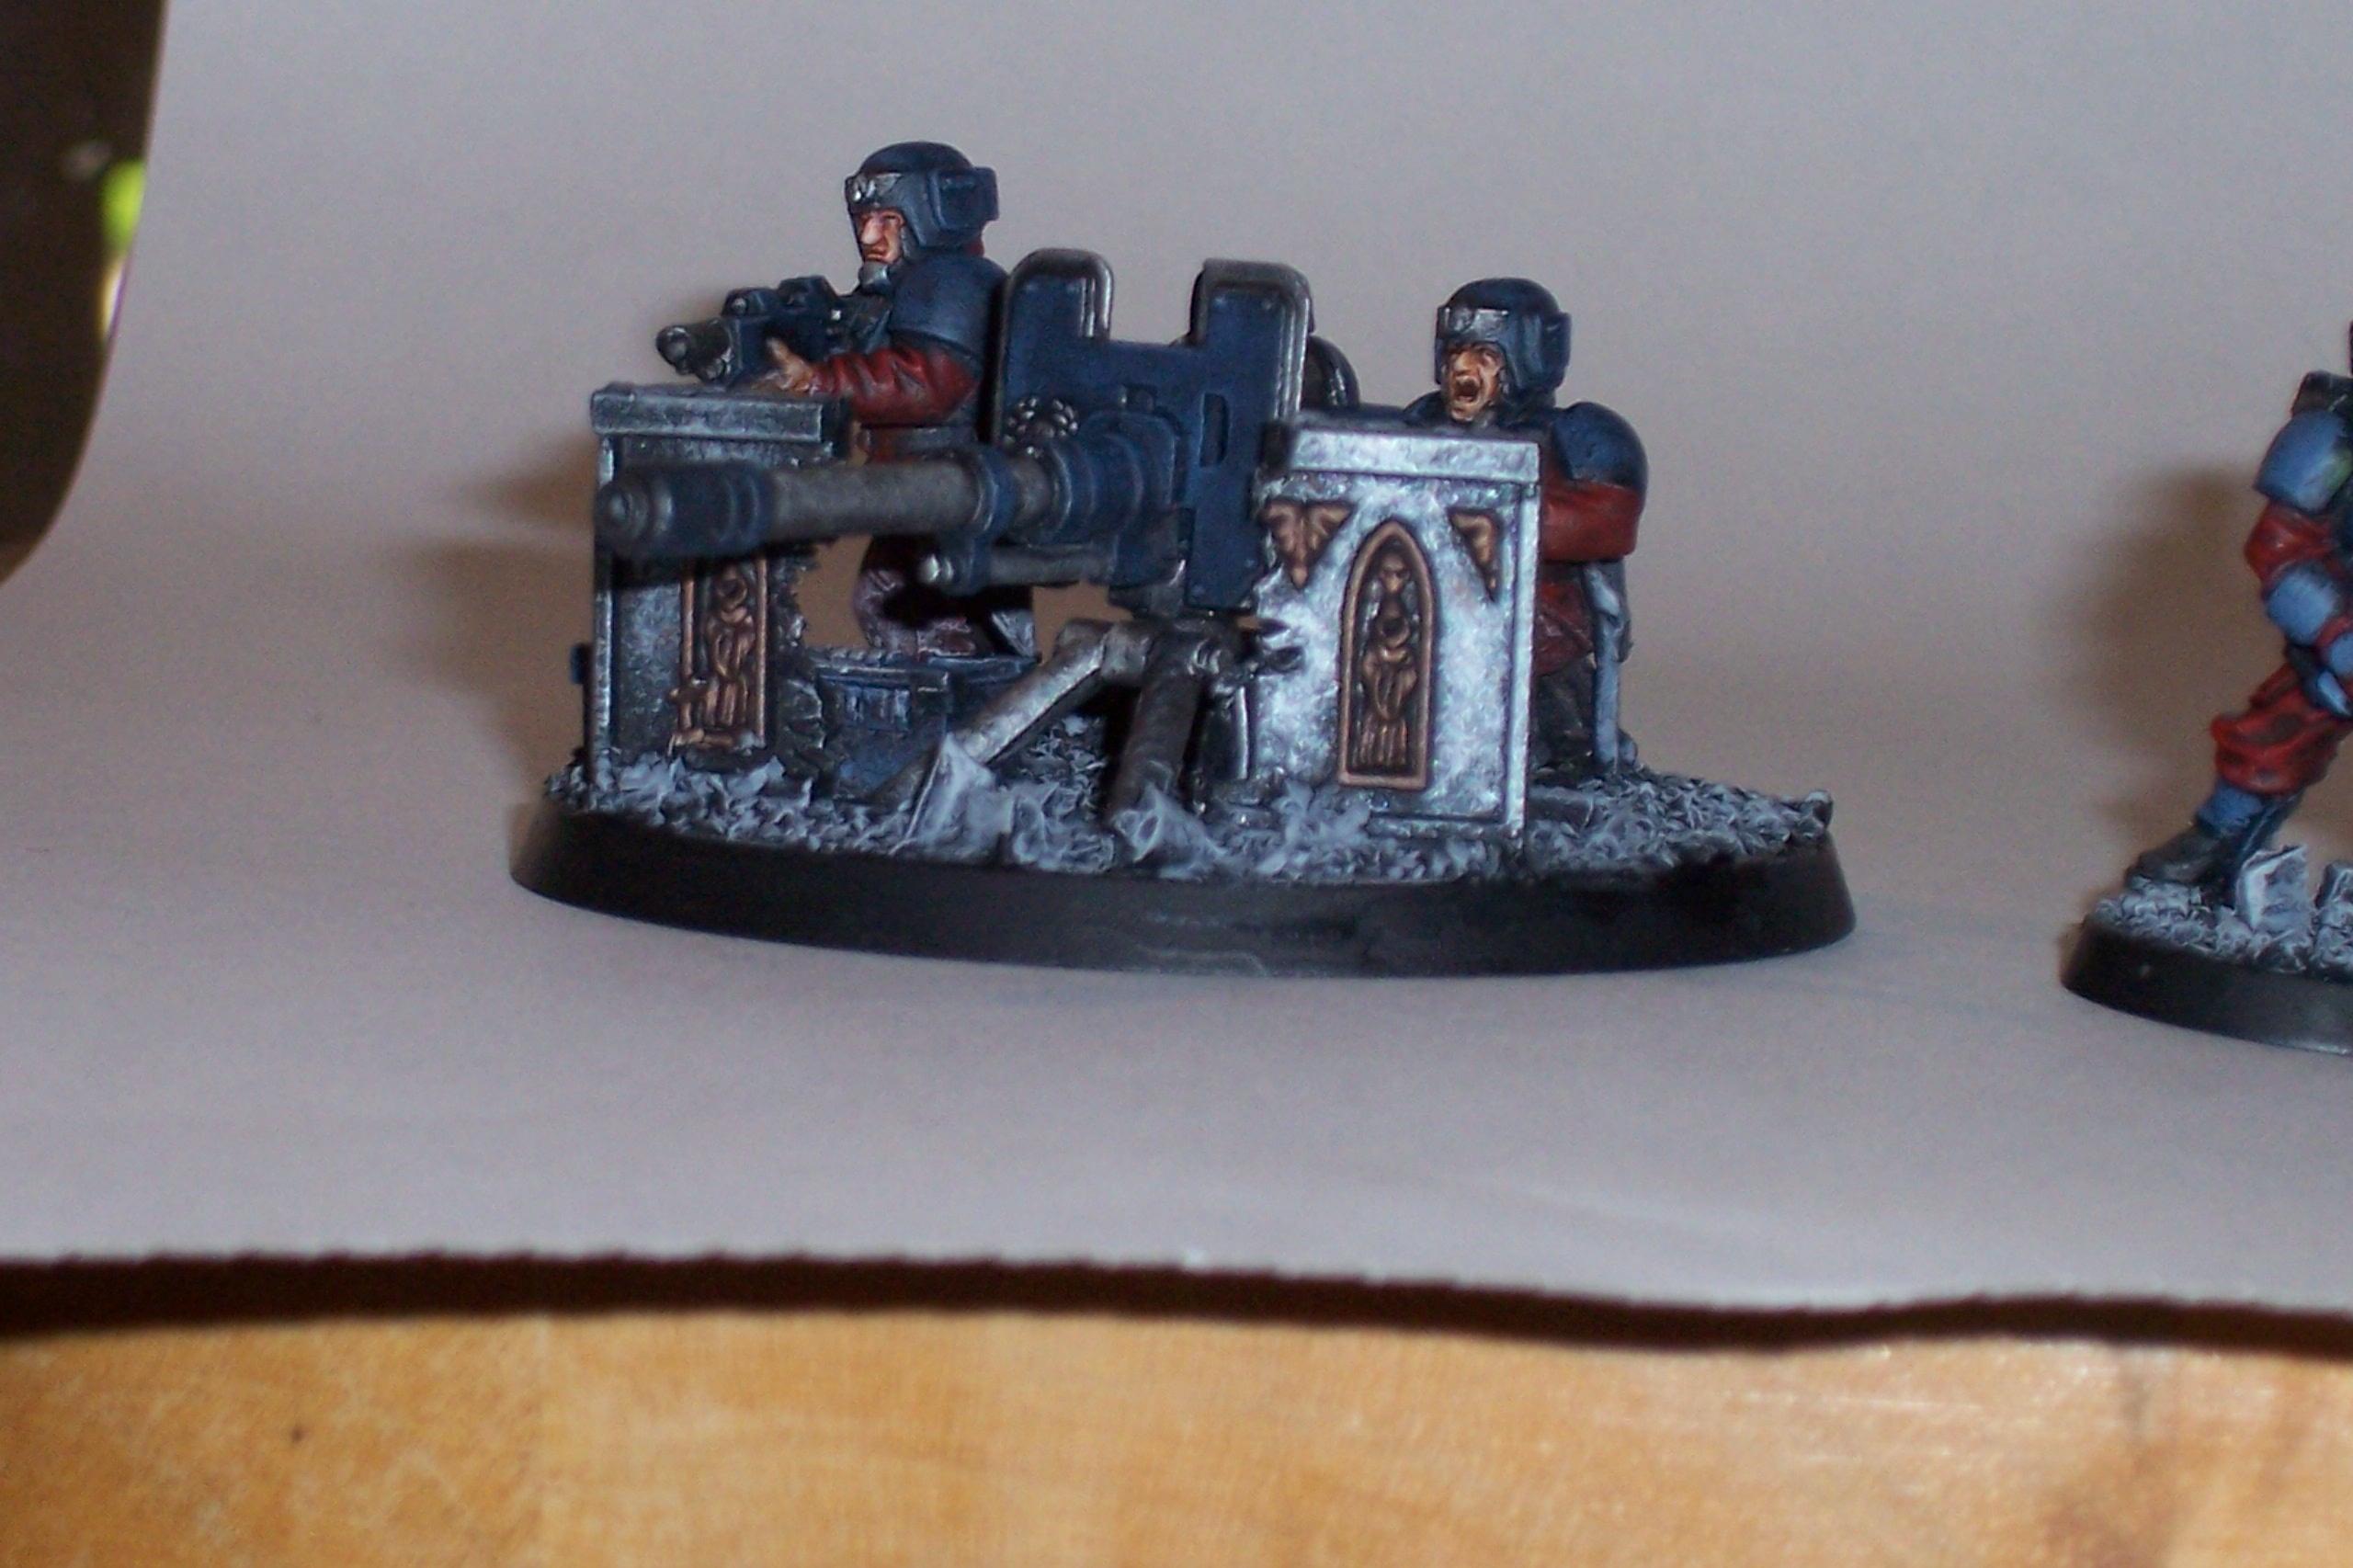 Cadians, Heavy Weapon, Imperial Guard, Urban, Warhammer 40,000